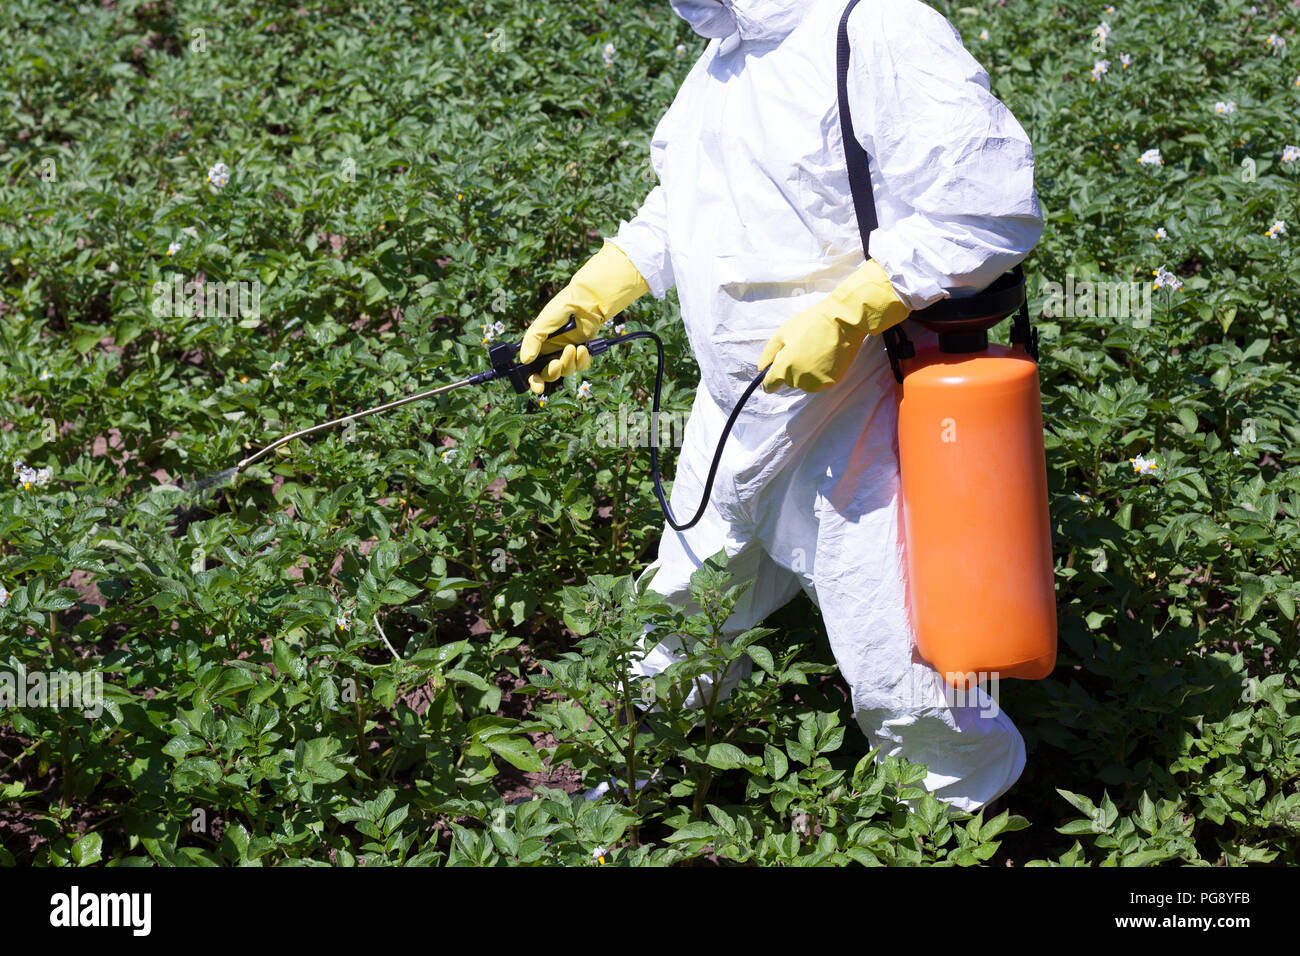 Spraying A Vegetable Garden With Toxic Substances Protecting Vegetables With Herbicides Pesticides Or Insecticides Stock Photo Alamy